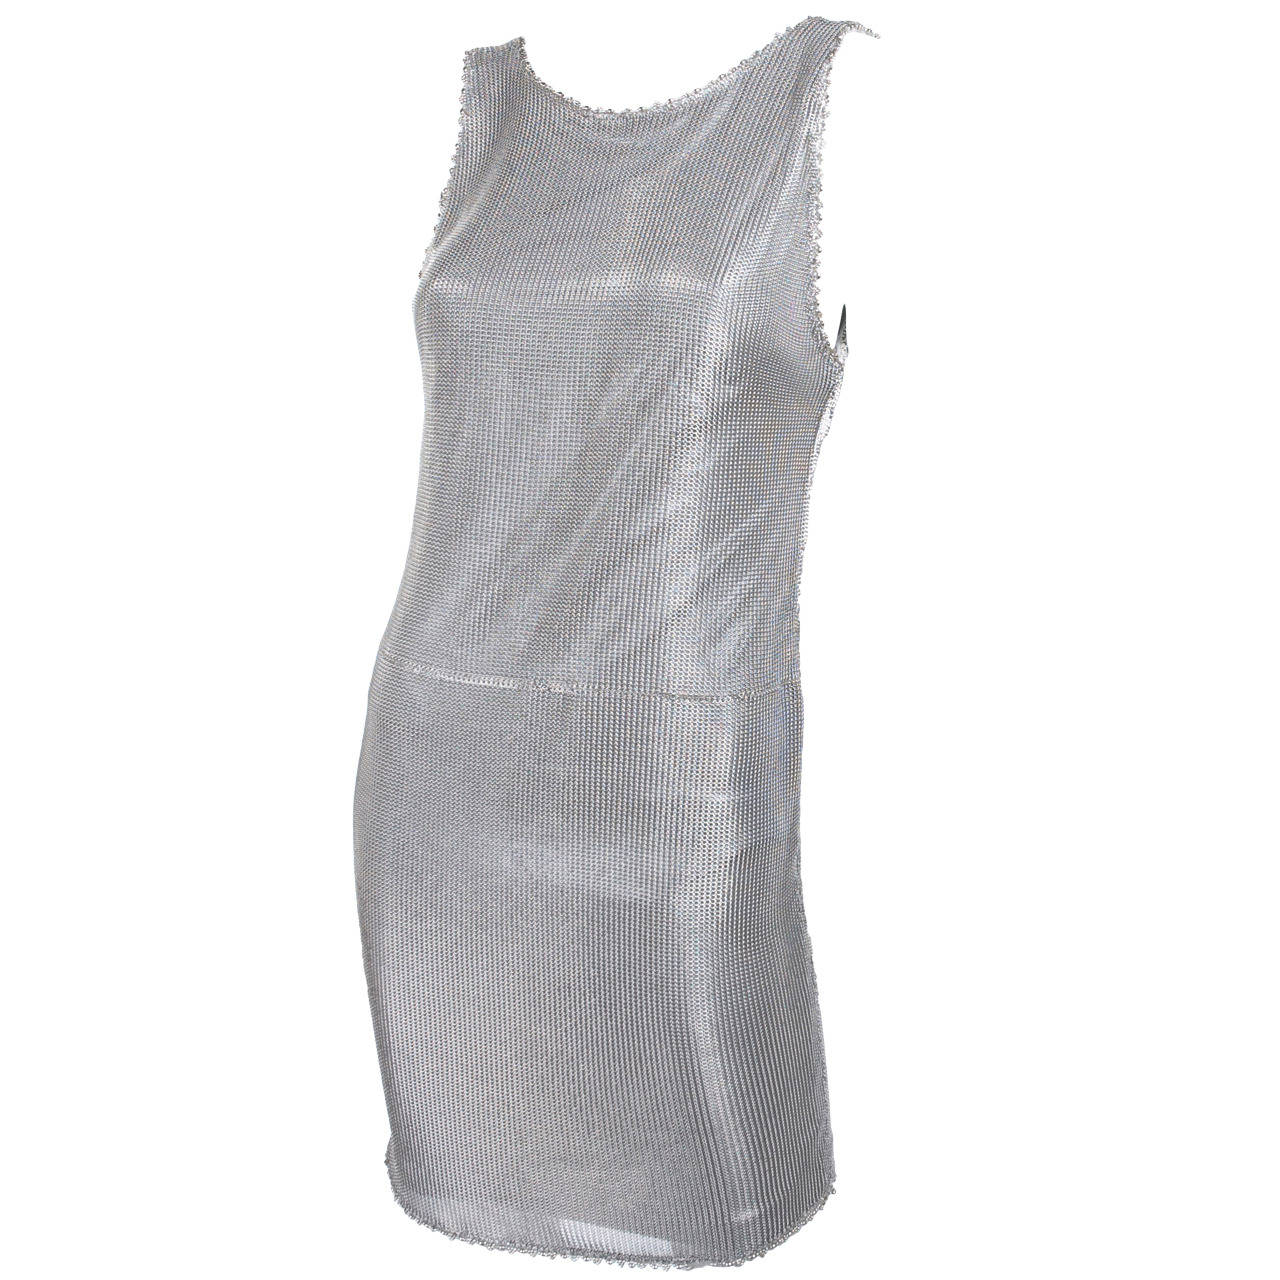 80's Atelier Gianni Versace Chain Link Metal Dress. For Sale